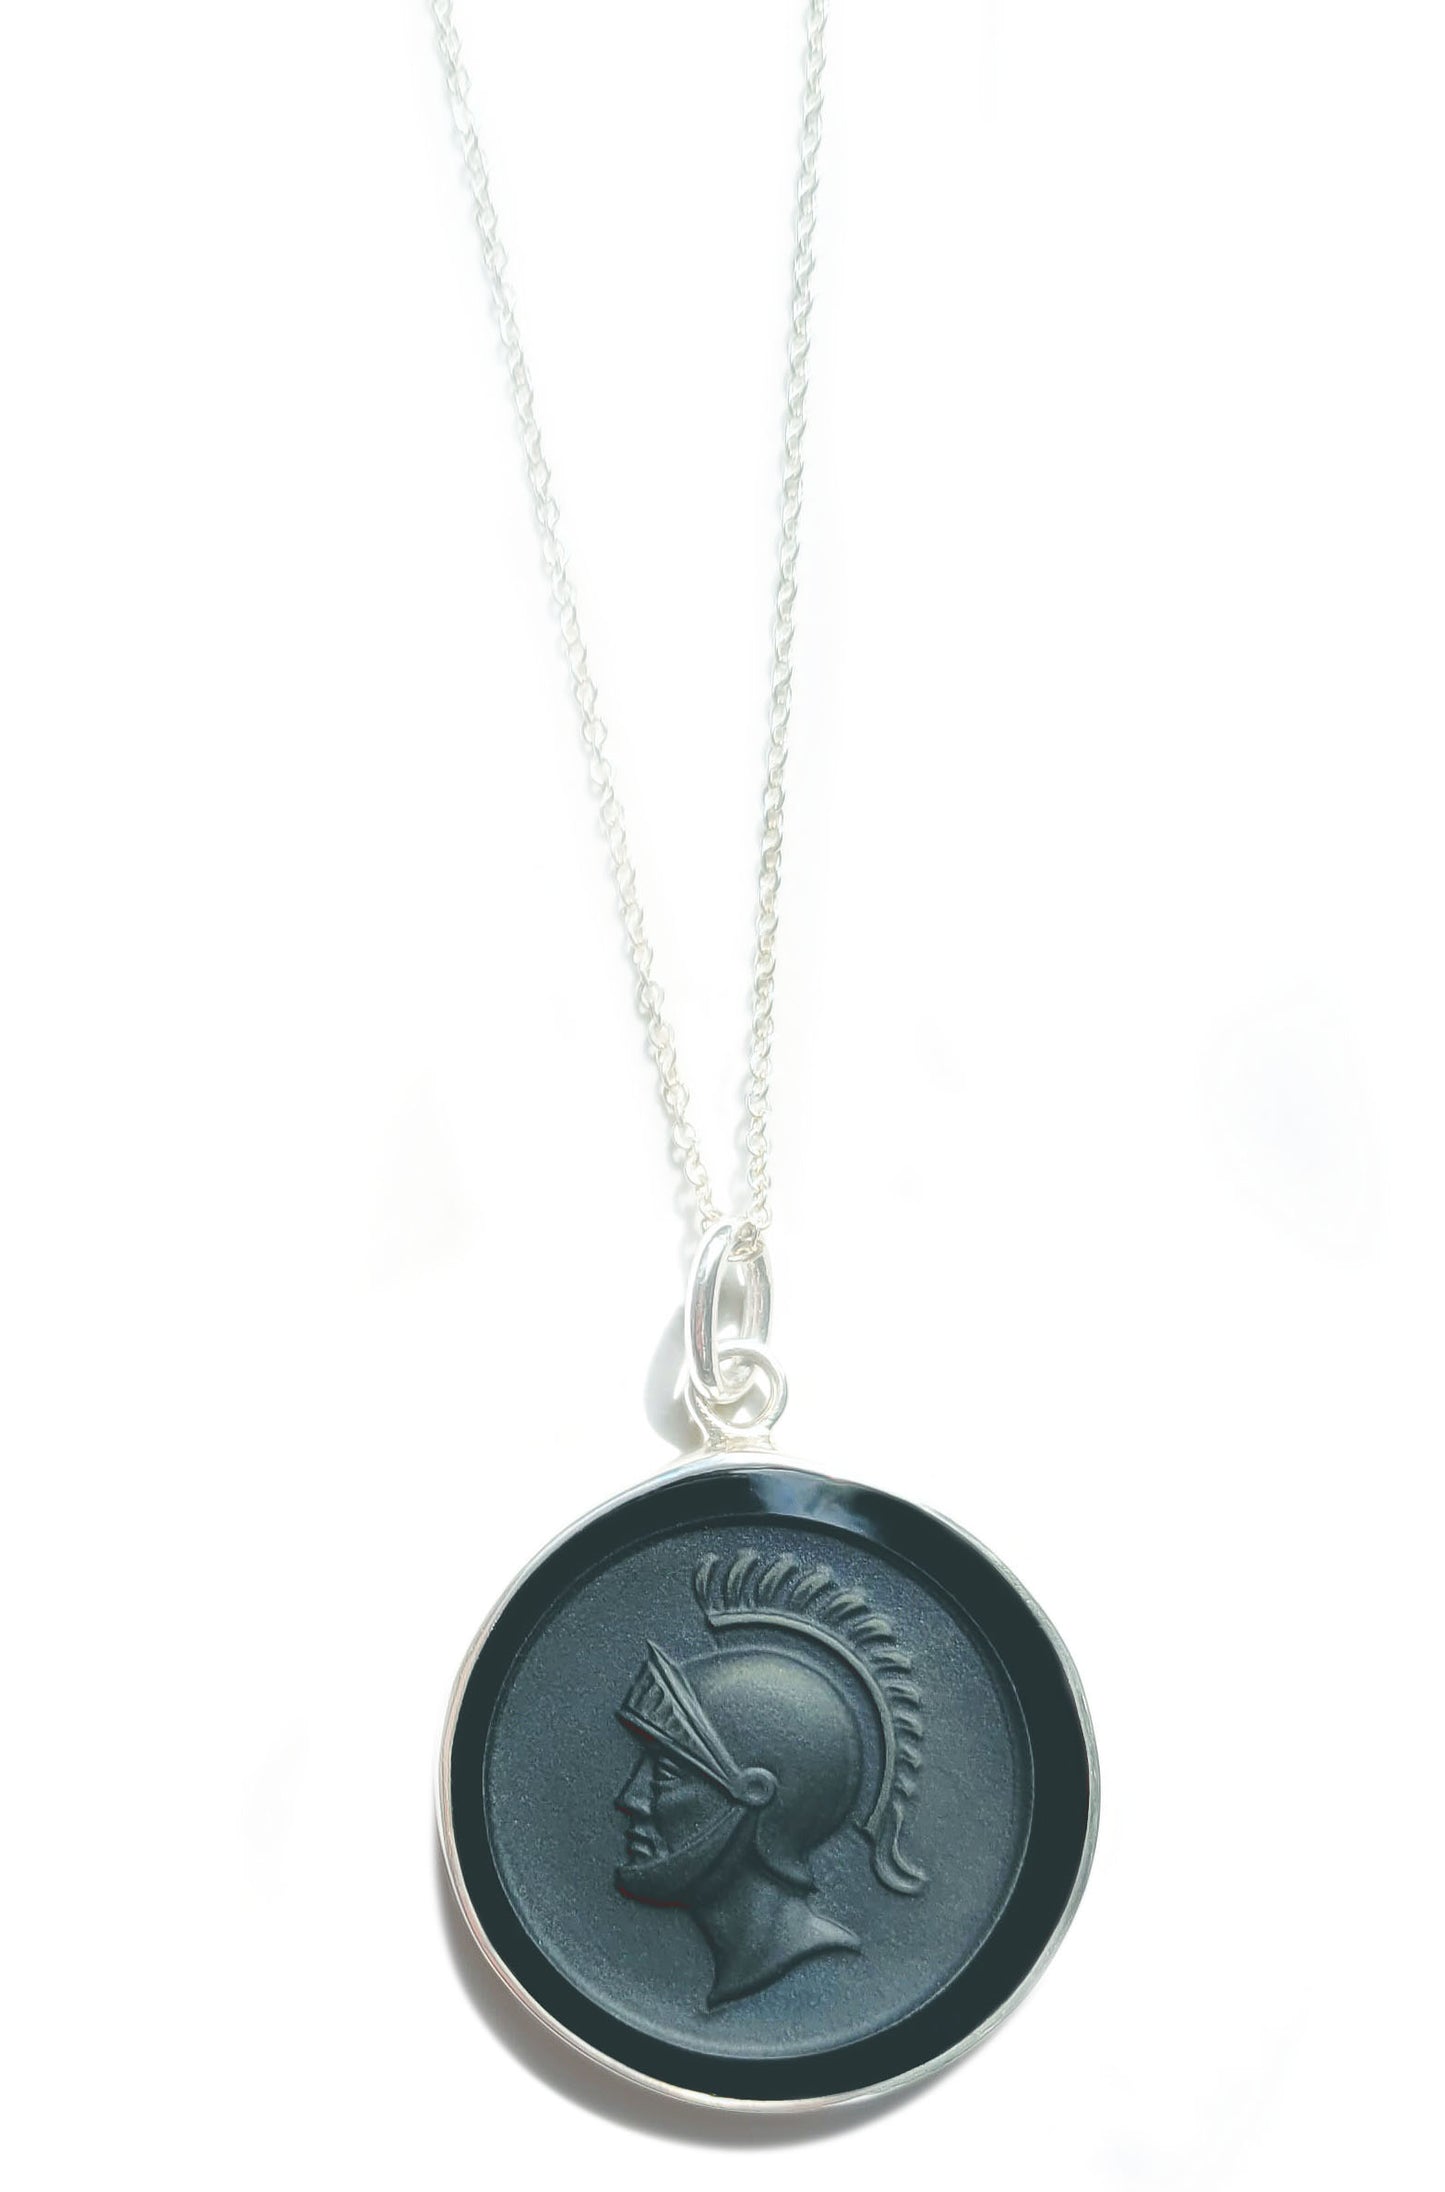 Black Onyx Warrior Cameo Necklace in Sterling Silver